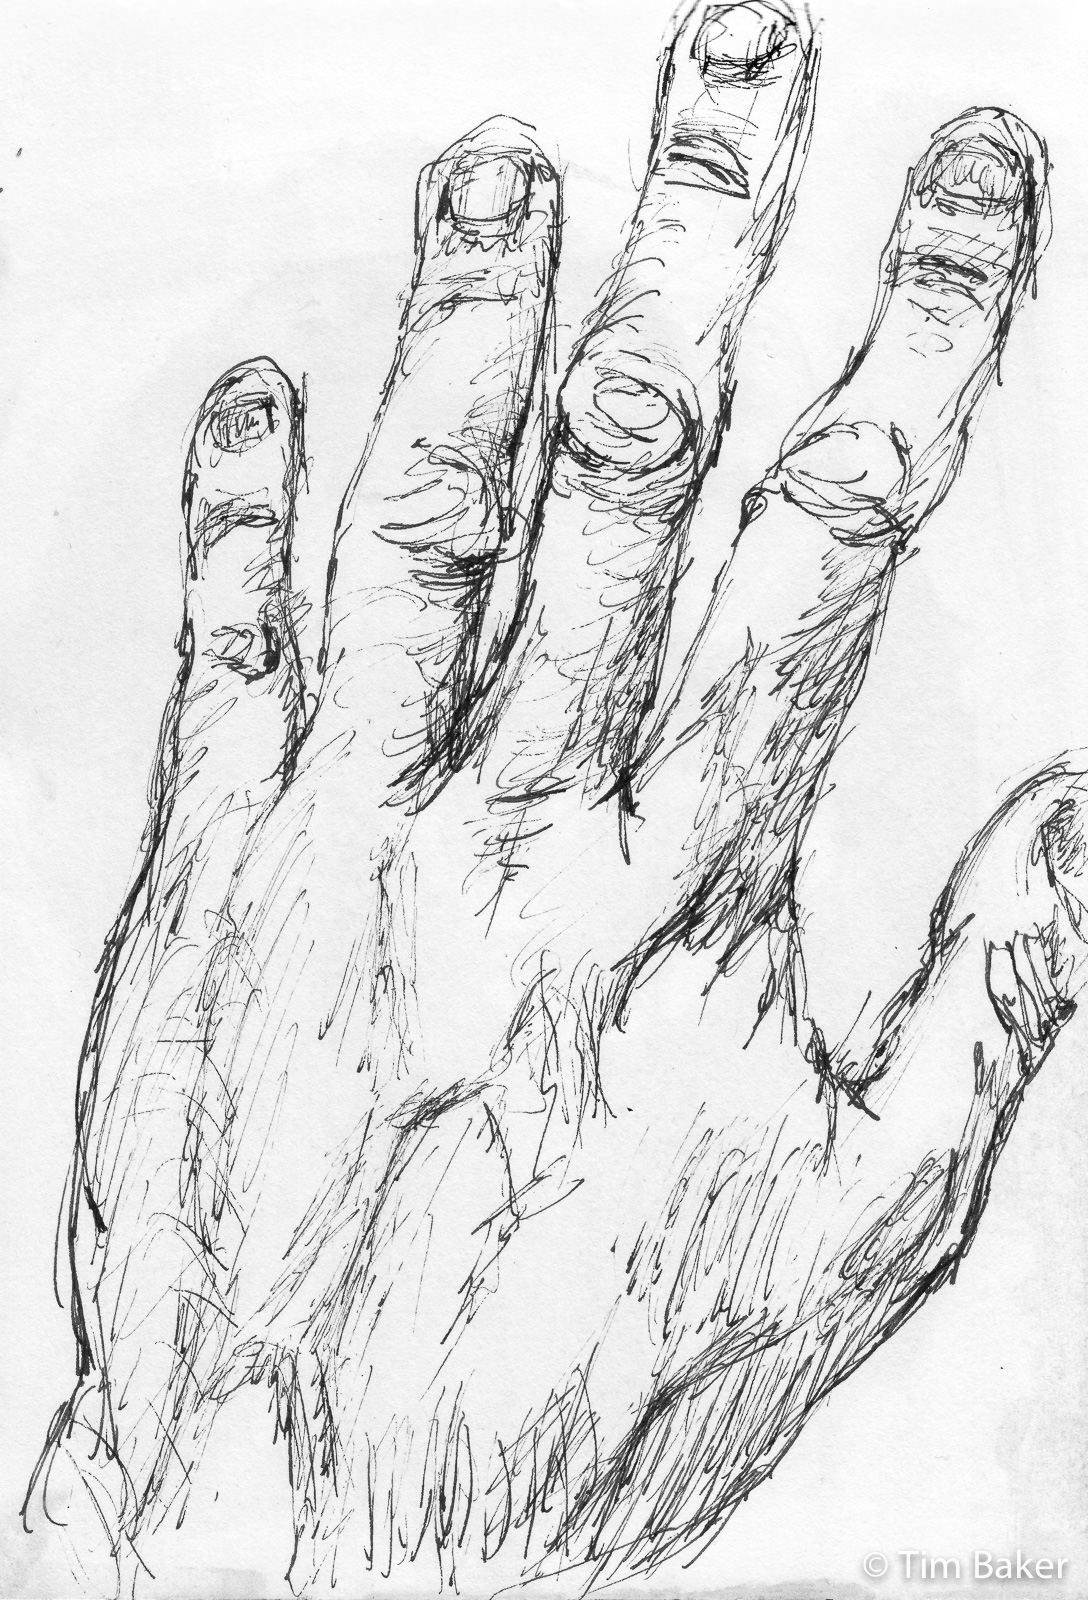 Hand Study, 5PM Challenge 62, Fountain Pen with Sketchink, A5 sketchbook.